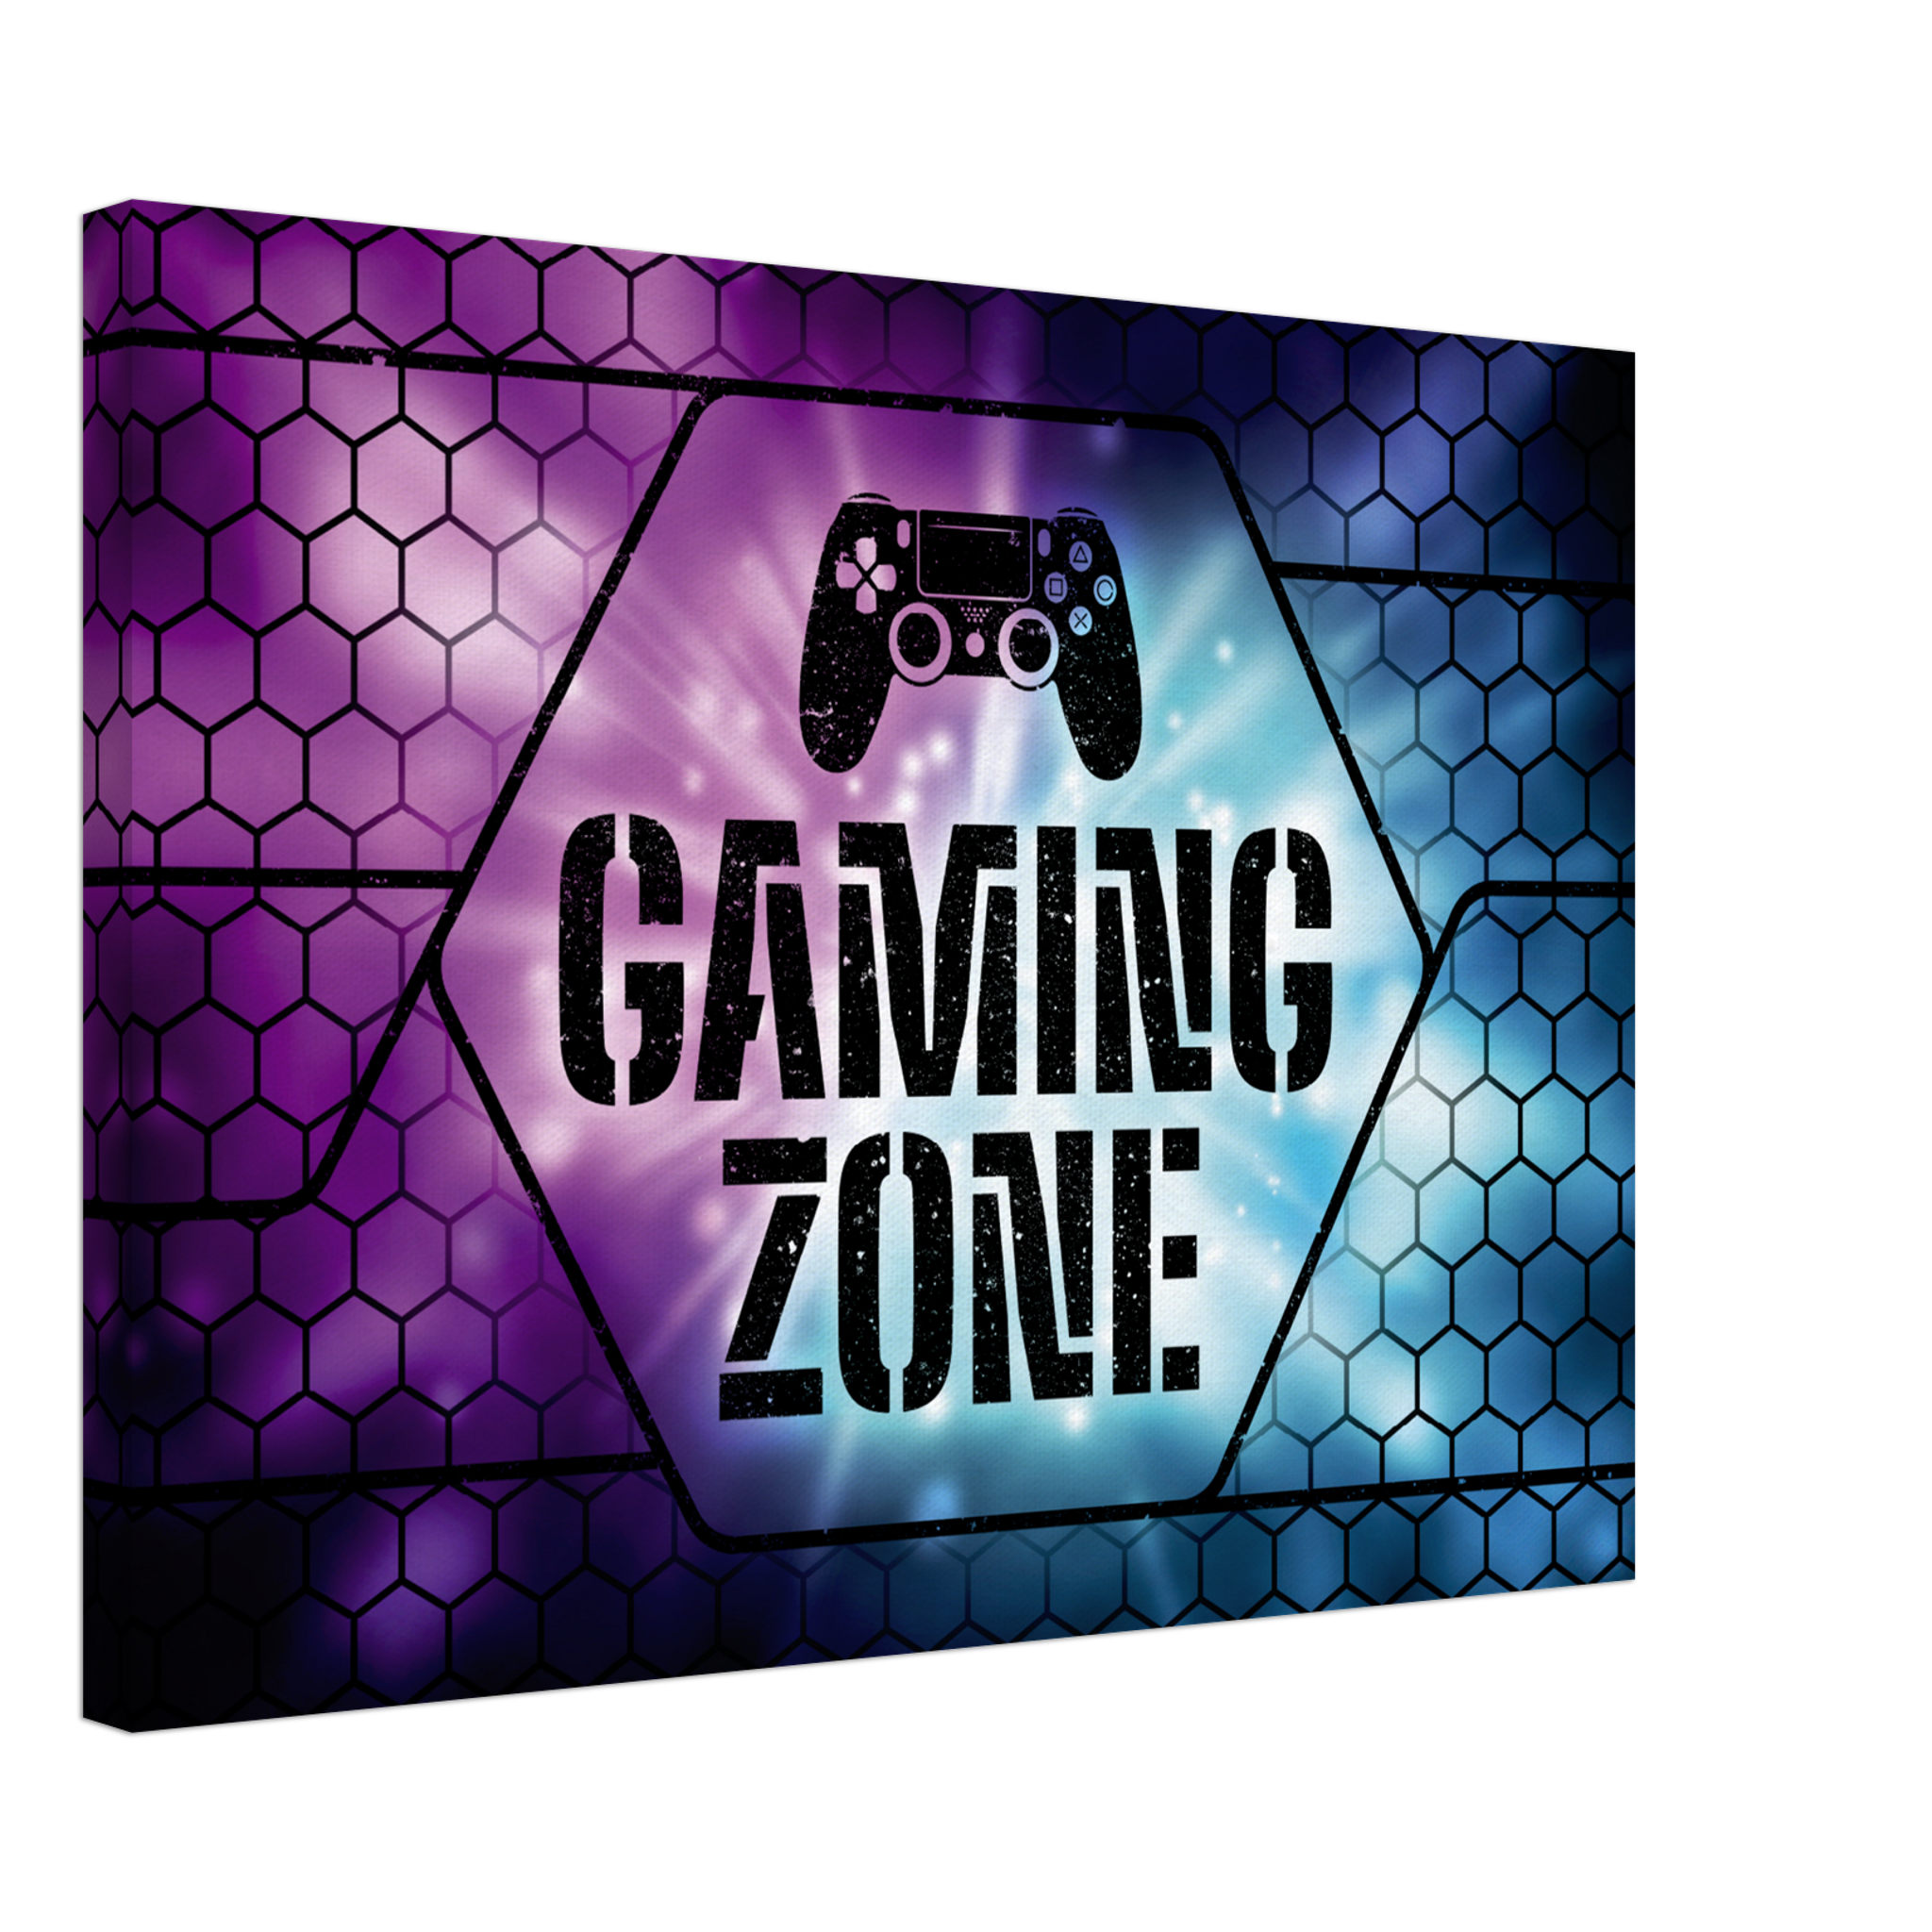 Gaming Zone Neon Duo 1 Canvas